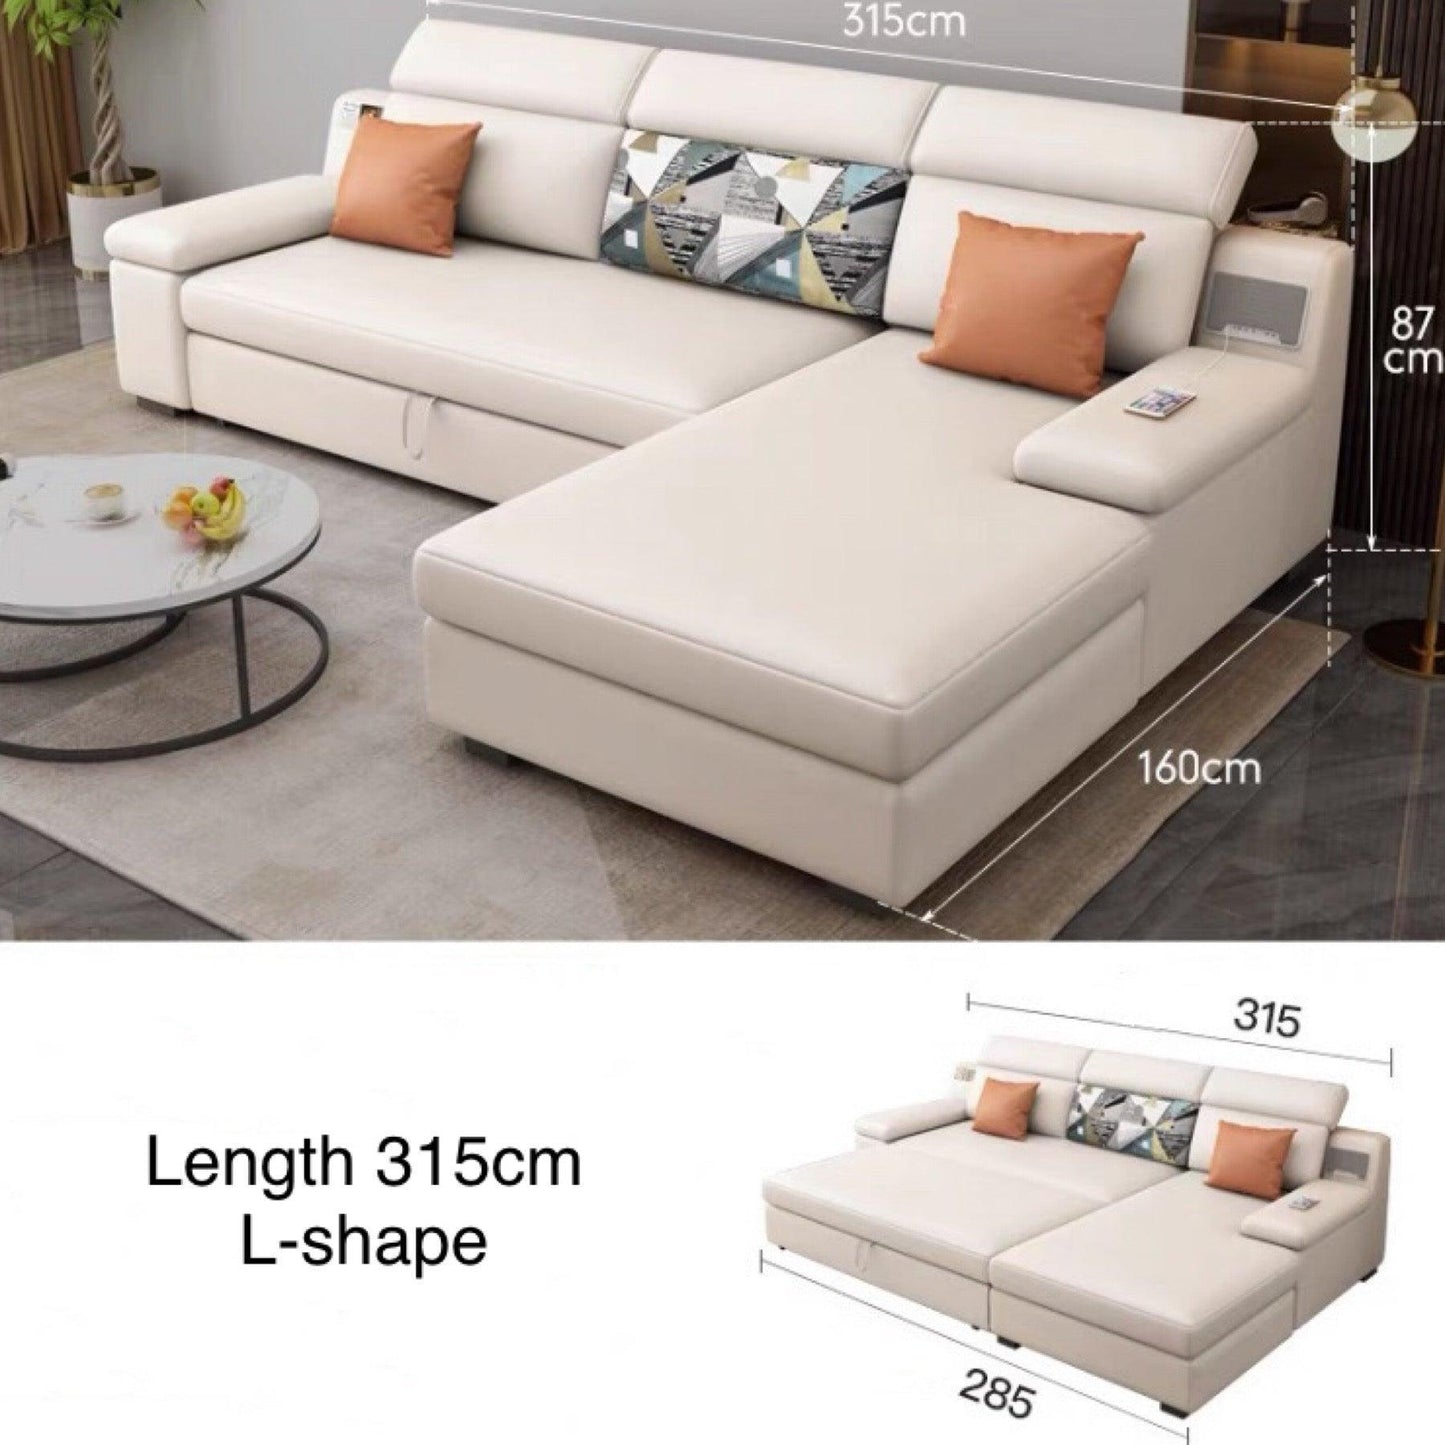 home-atelier-f31a Leather-Aire / Length 315cm/ L-shape / White Allson Sectional Sofa Bed